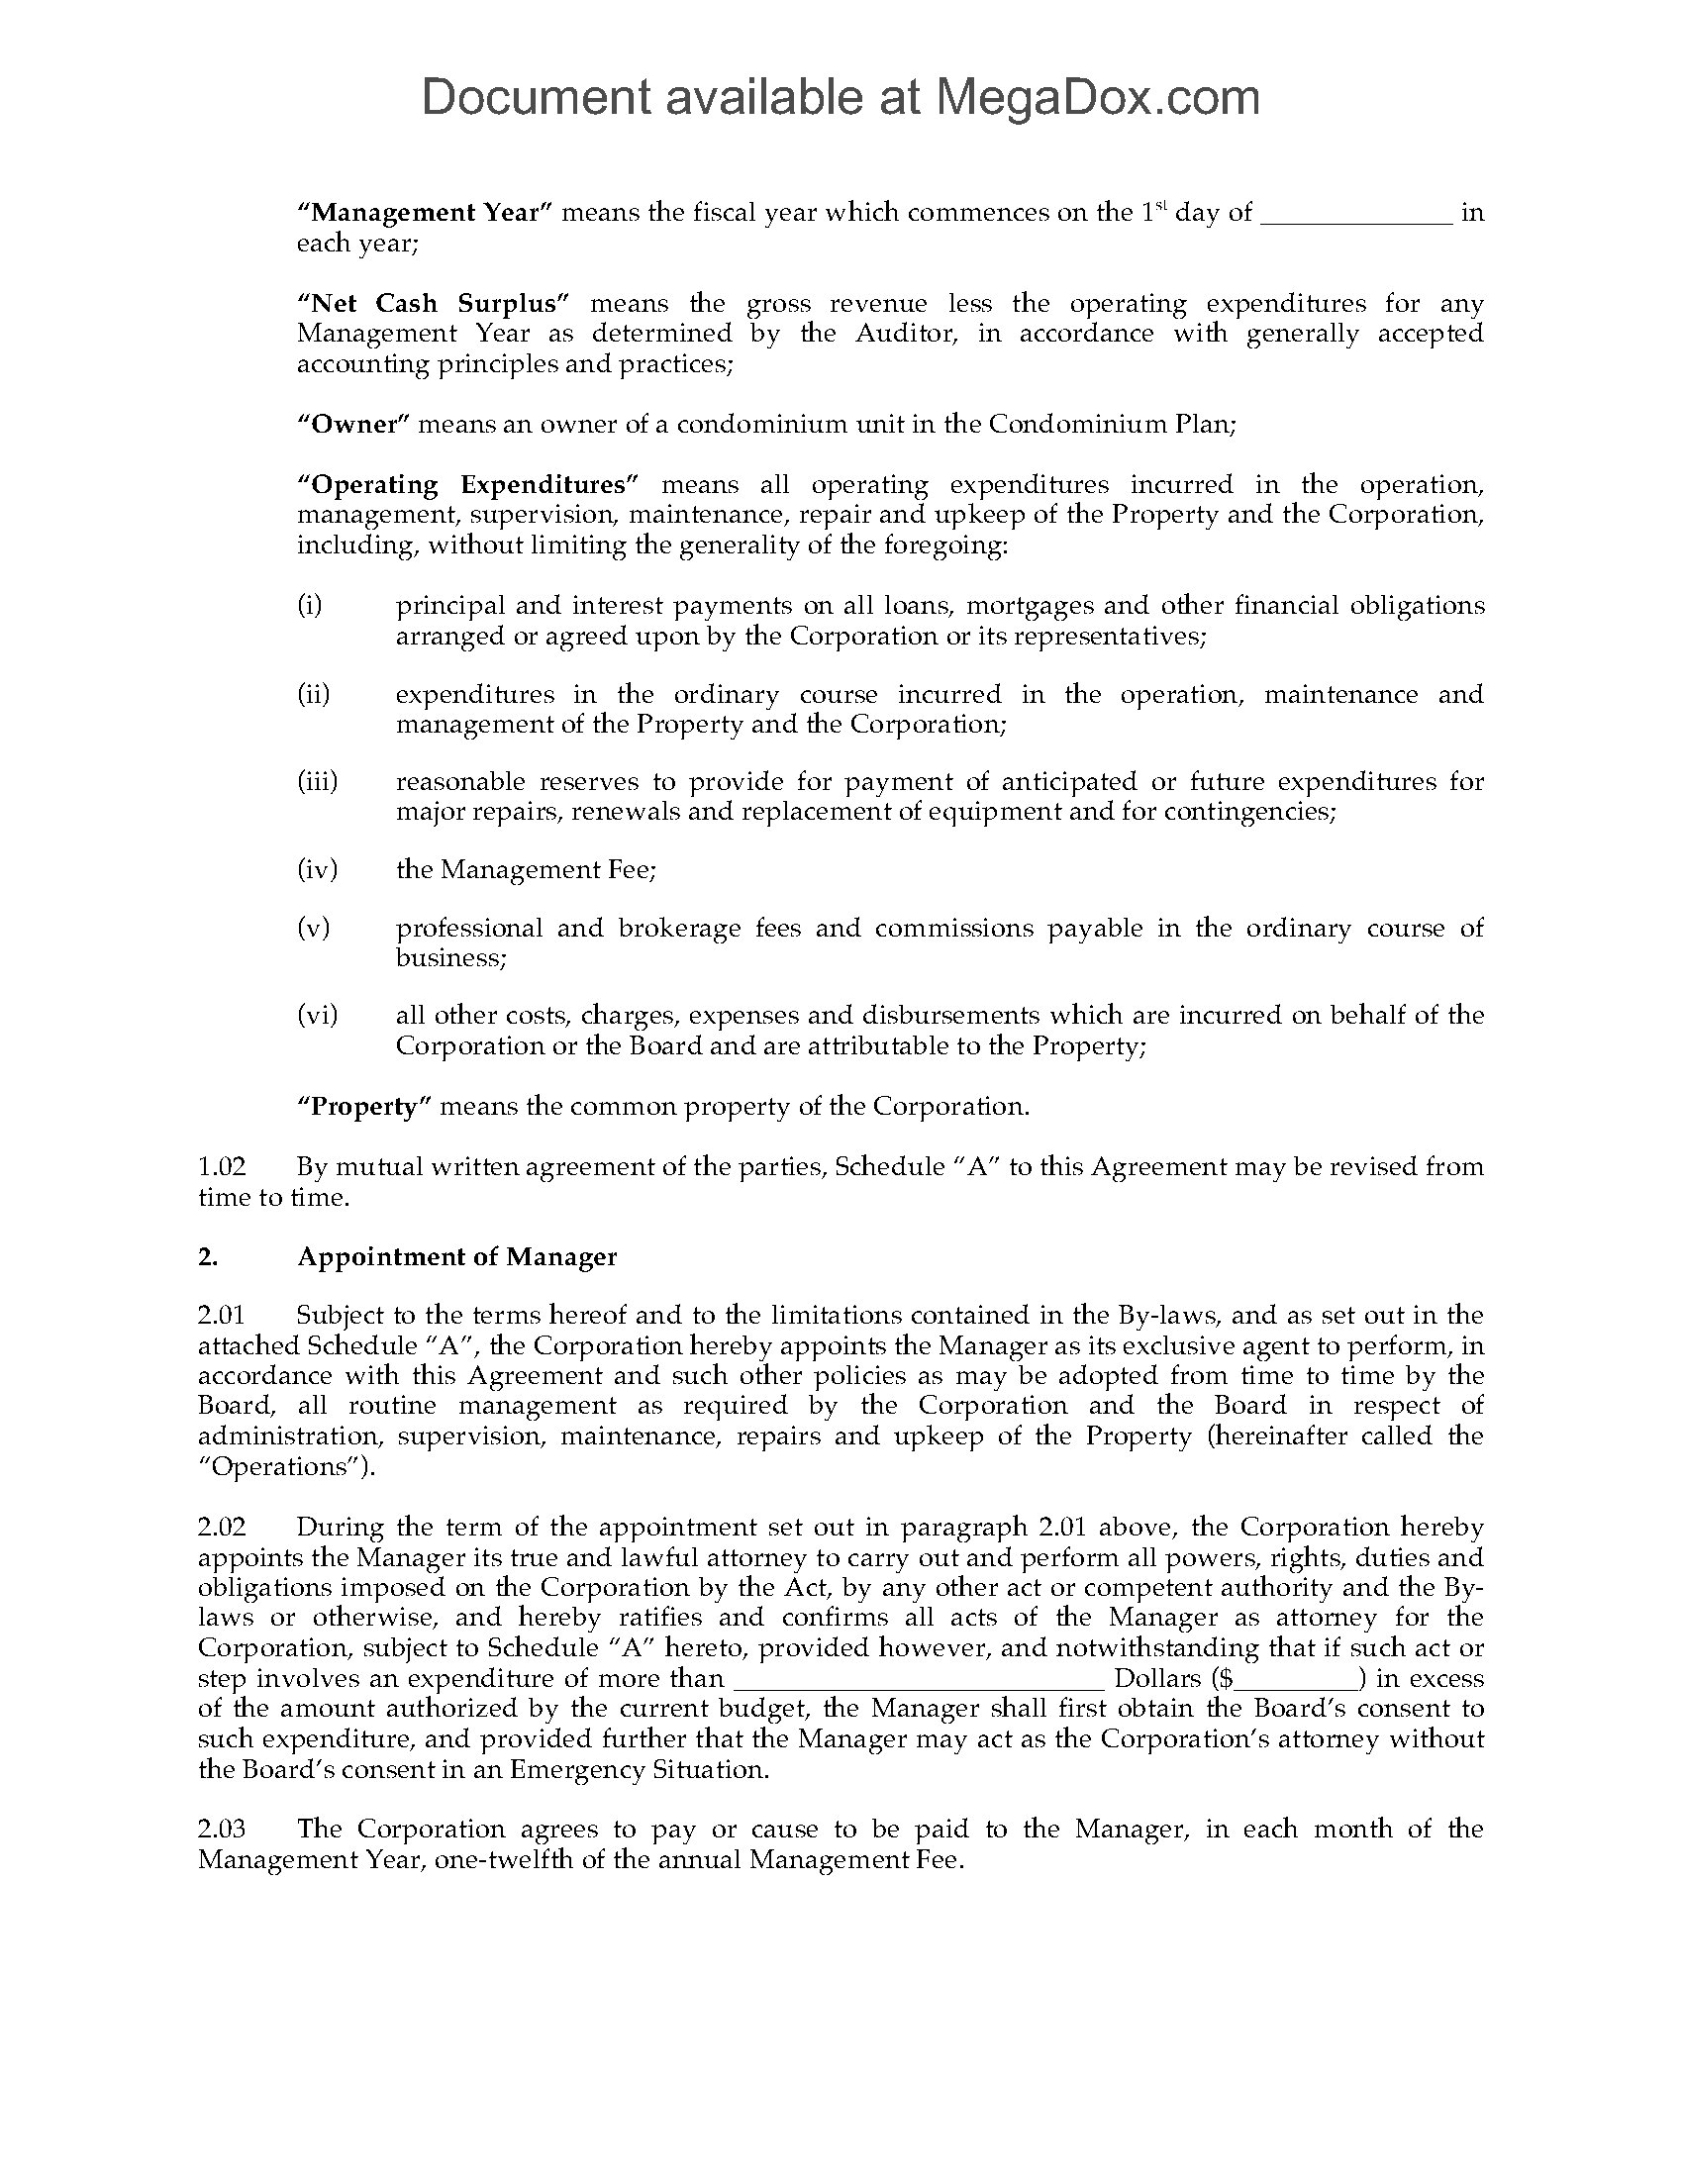 Condominium Common Property Management Agreement | Legal Forms And Throughout Landlords Property Management Agreement Template